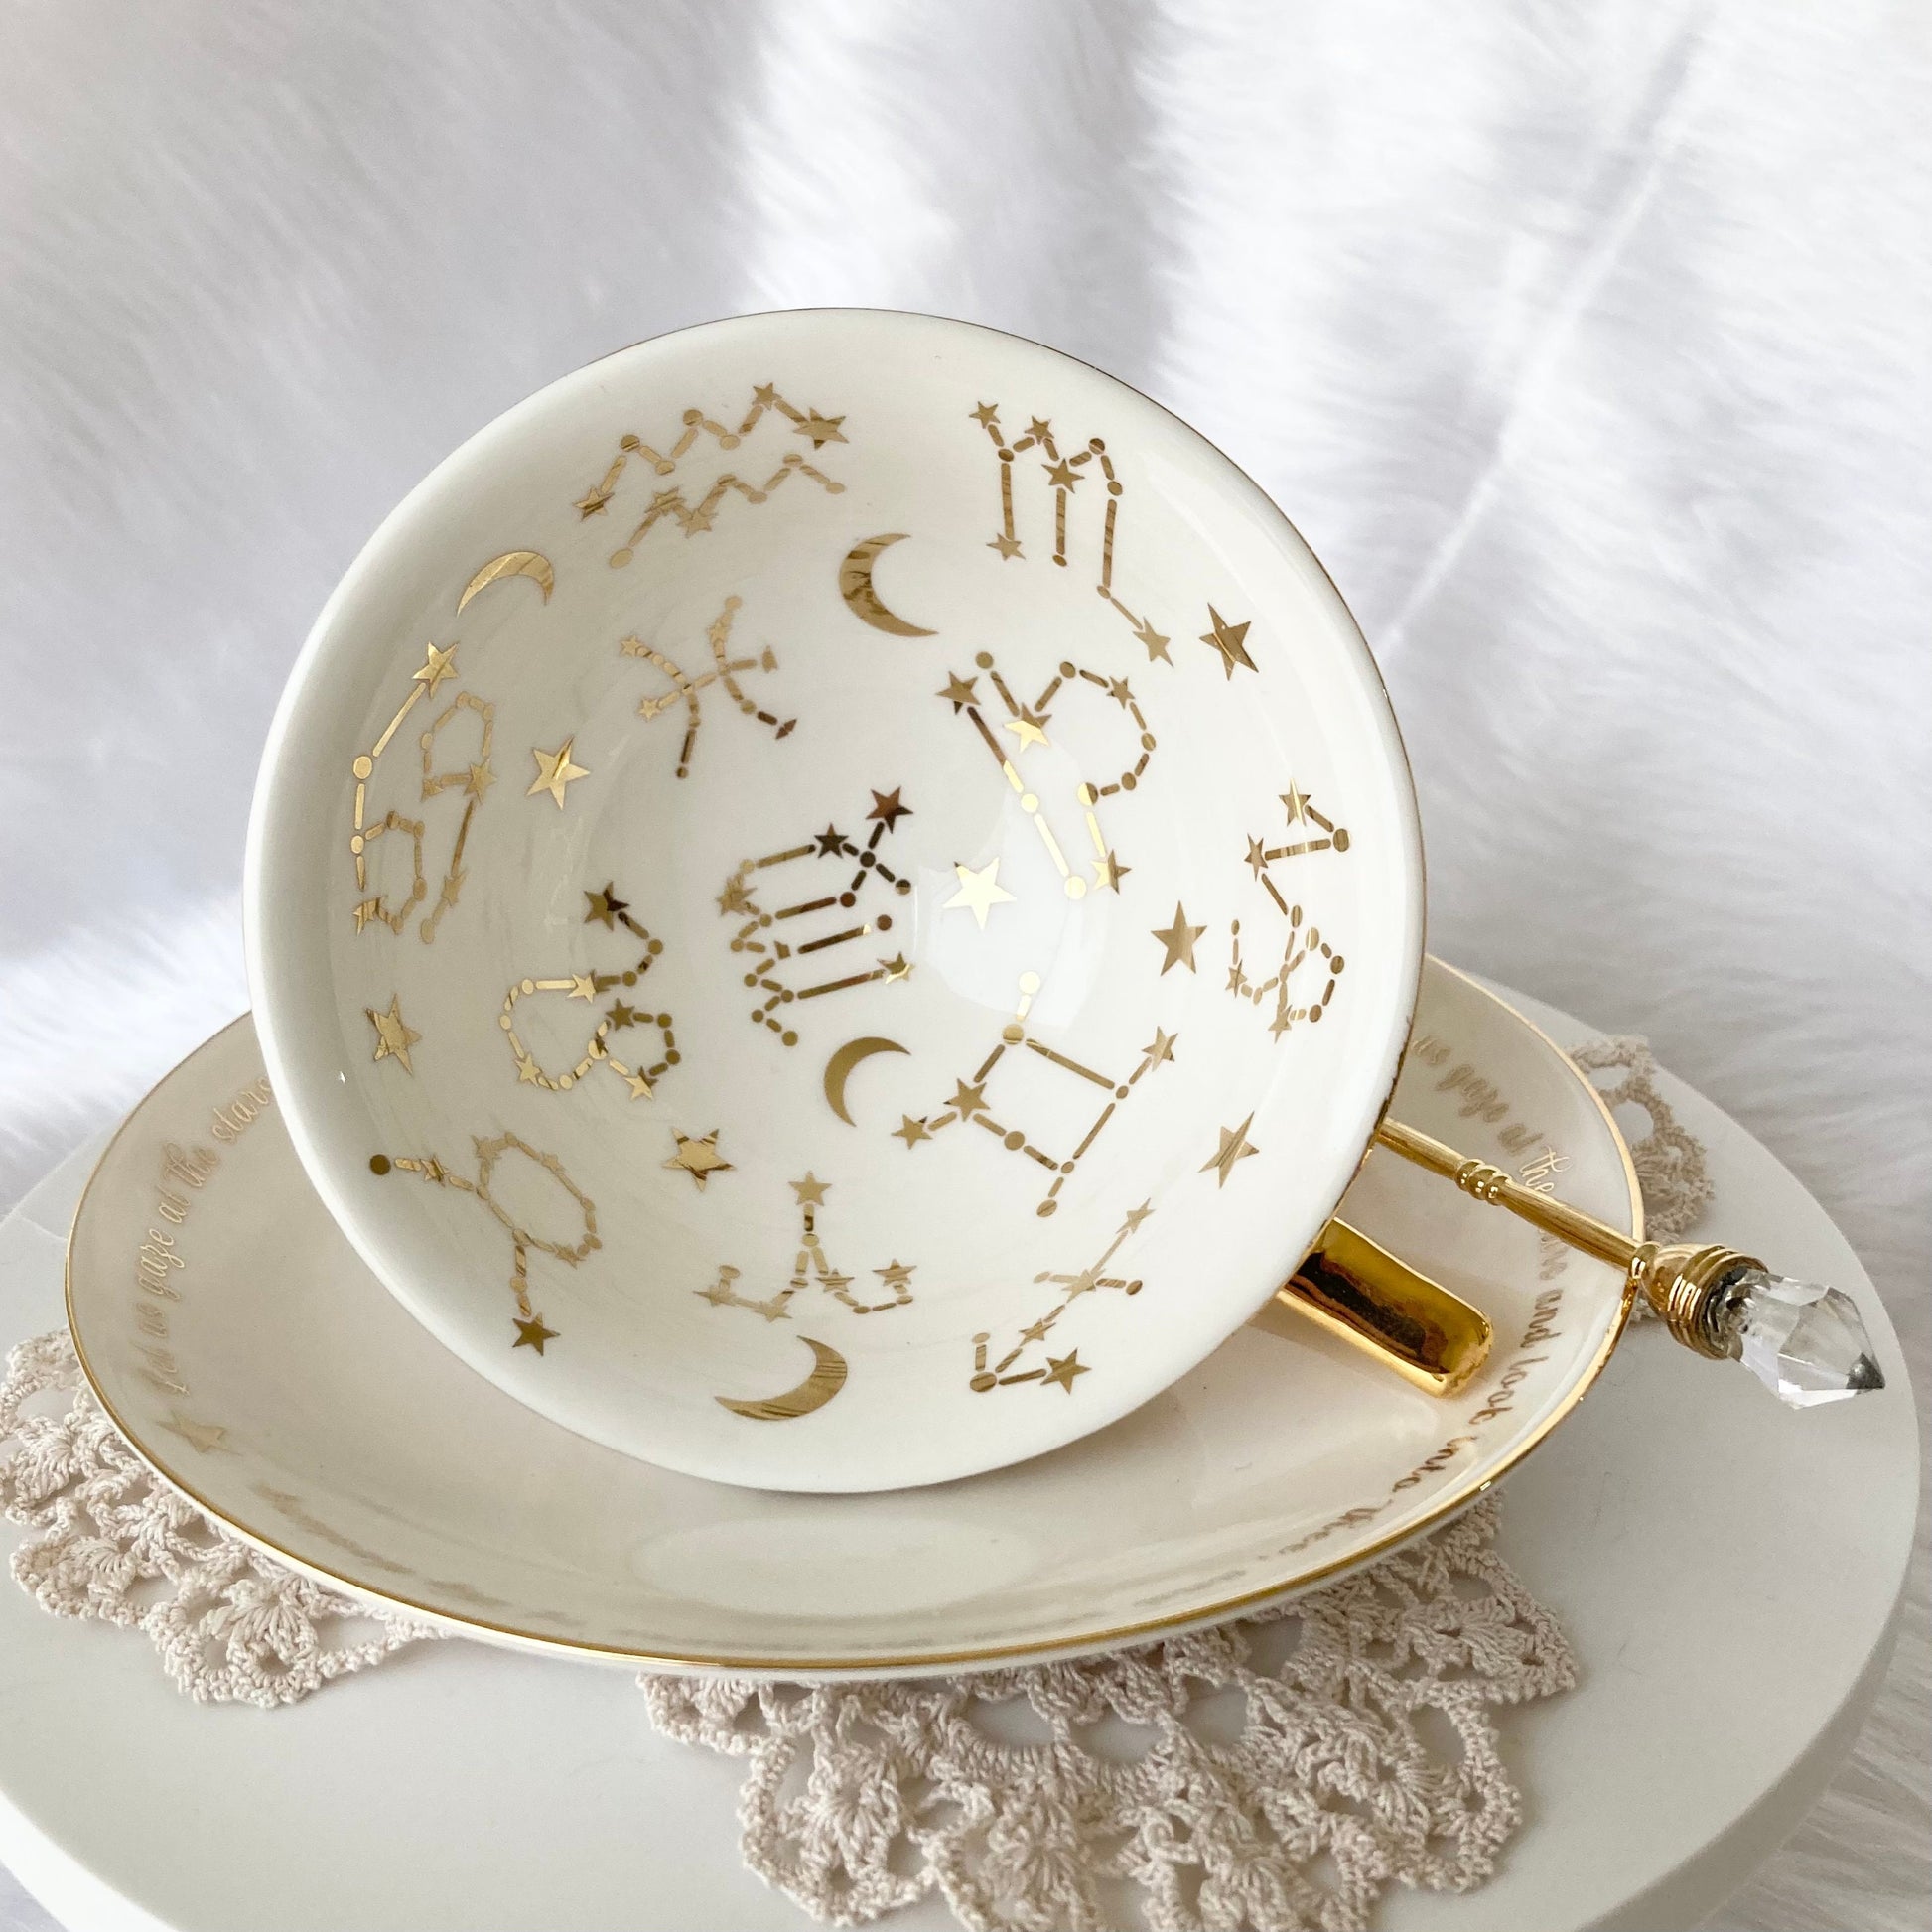 Gift for Mom Divination Teacup Birthday gift Gift for her Mothers day Unique gift Tea cup Tarot Witch Gifts Tarot Bridesmaid Gift Readings